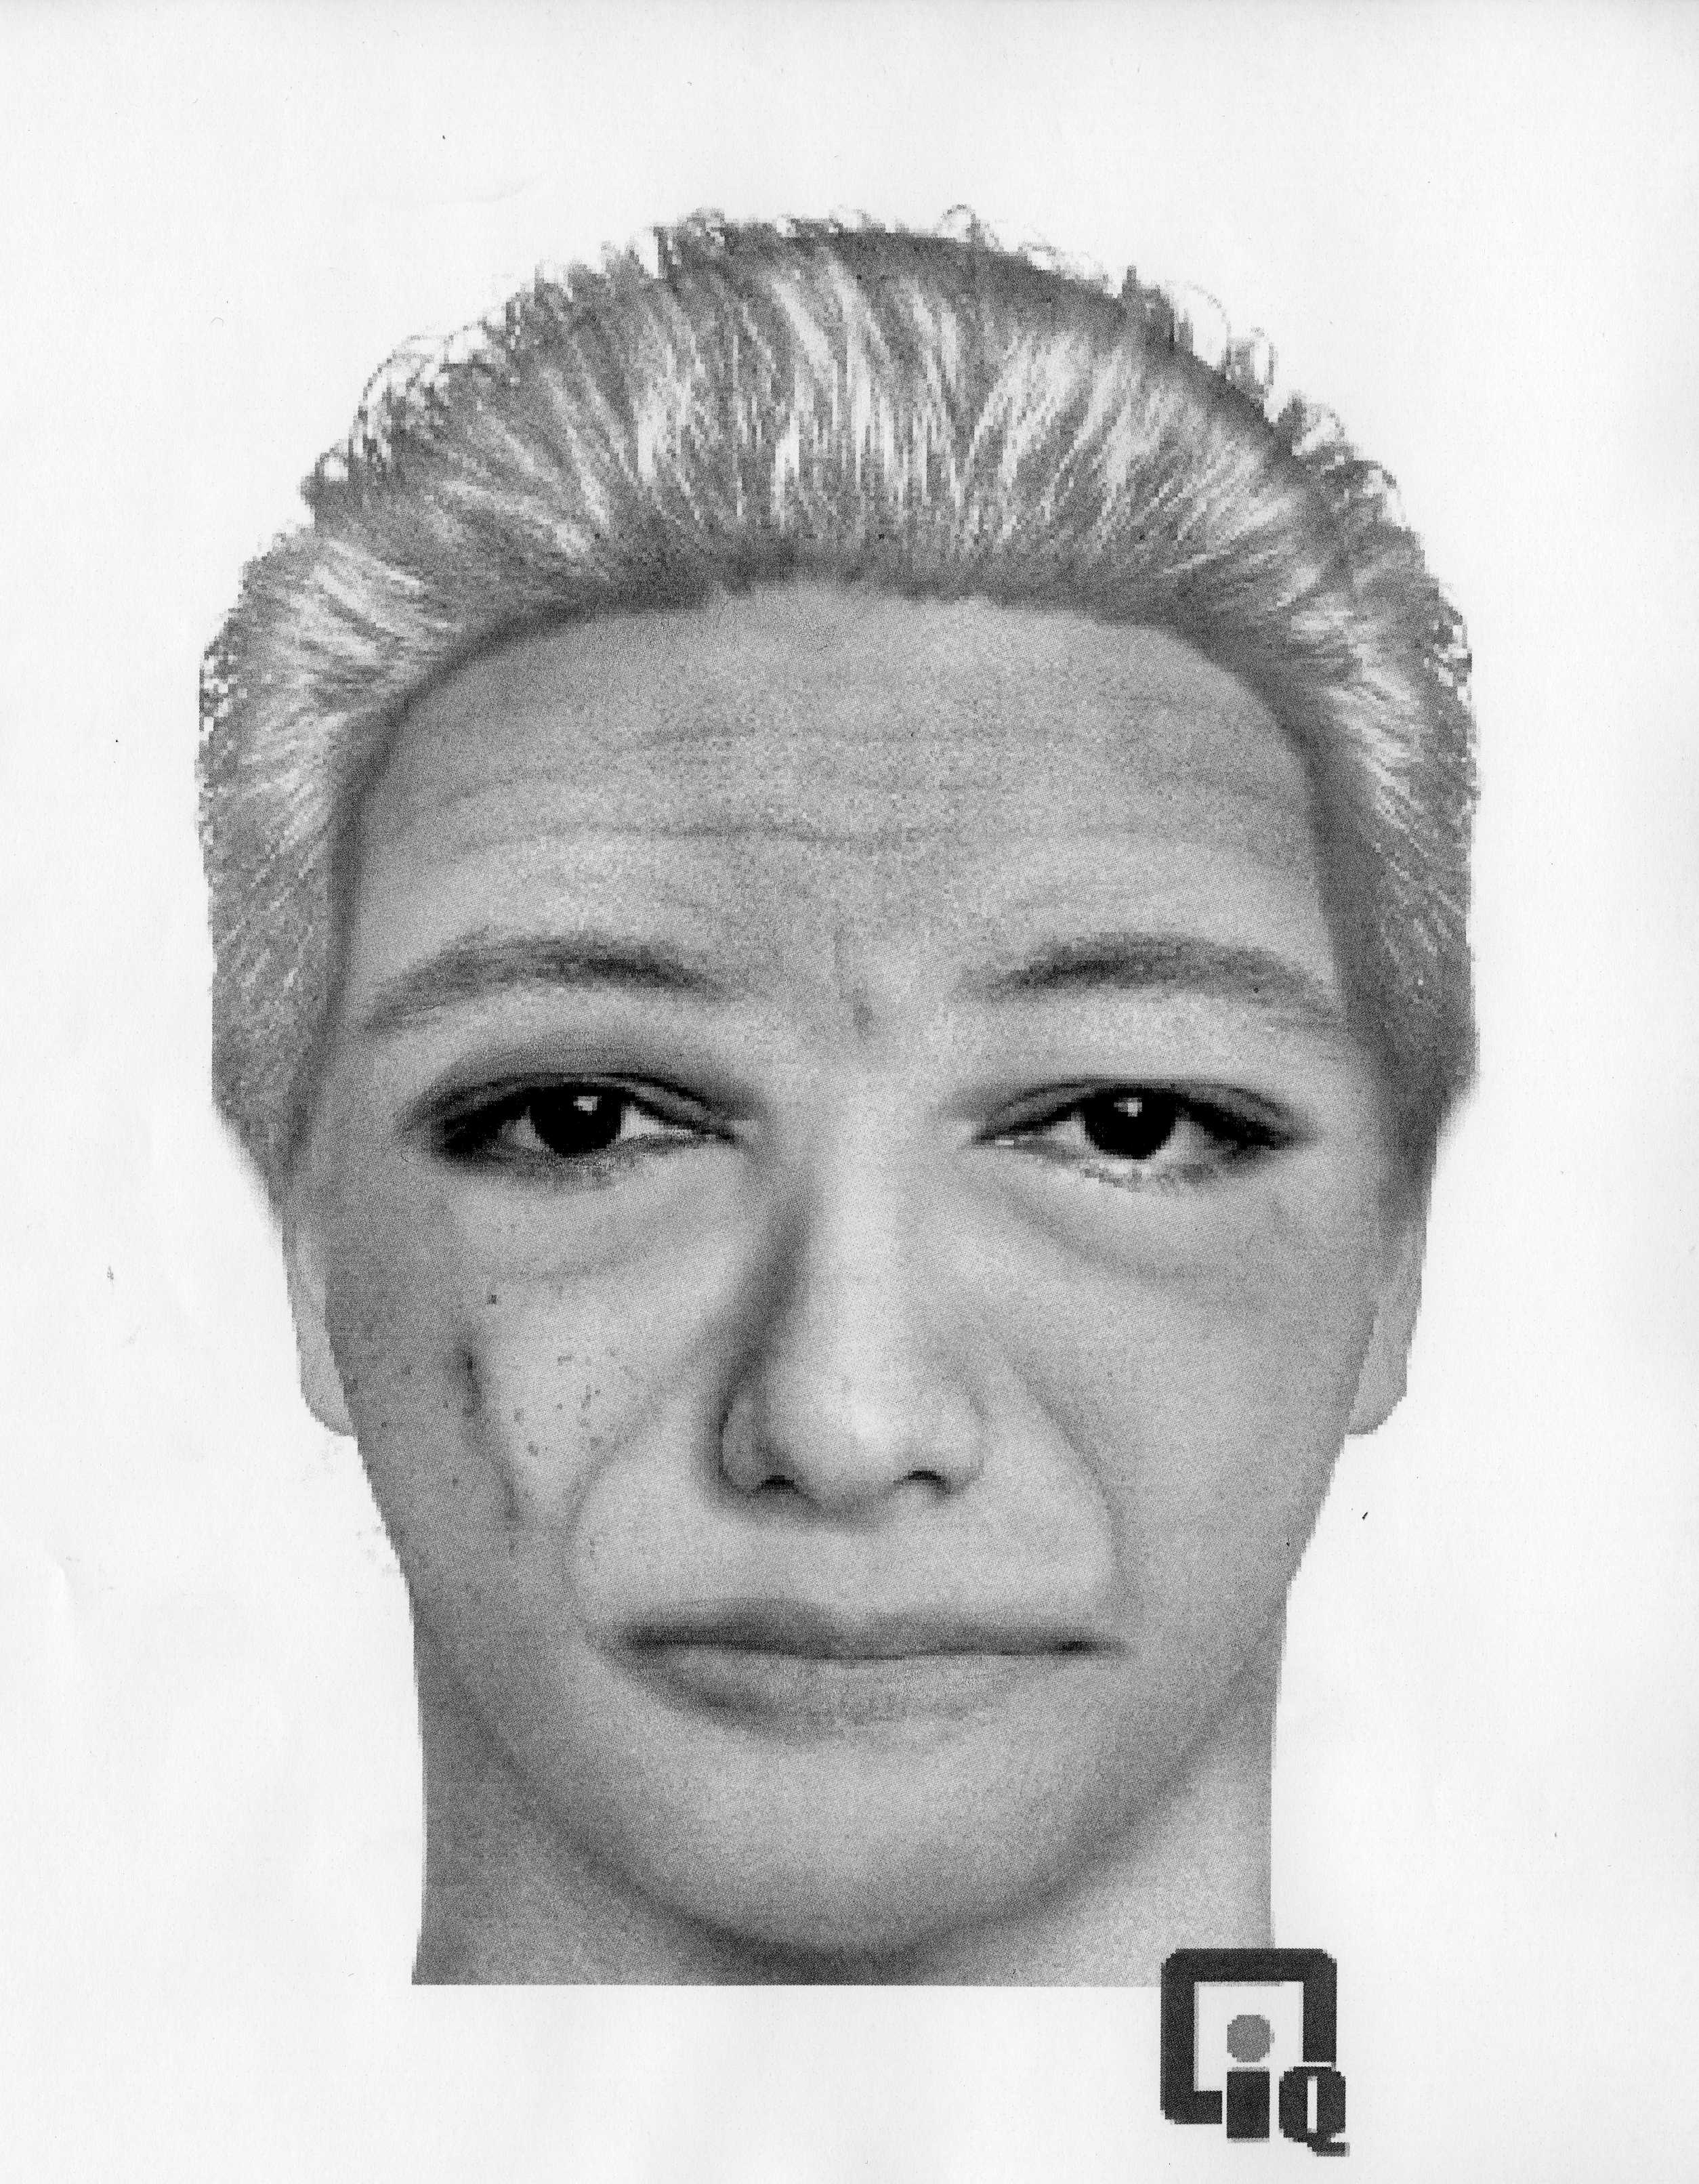 A police sketch of a suspect wanted in connection with three sex assault in Lakewood. (Photo: Lakewood Police Department)